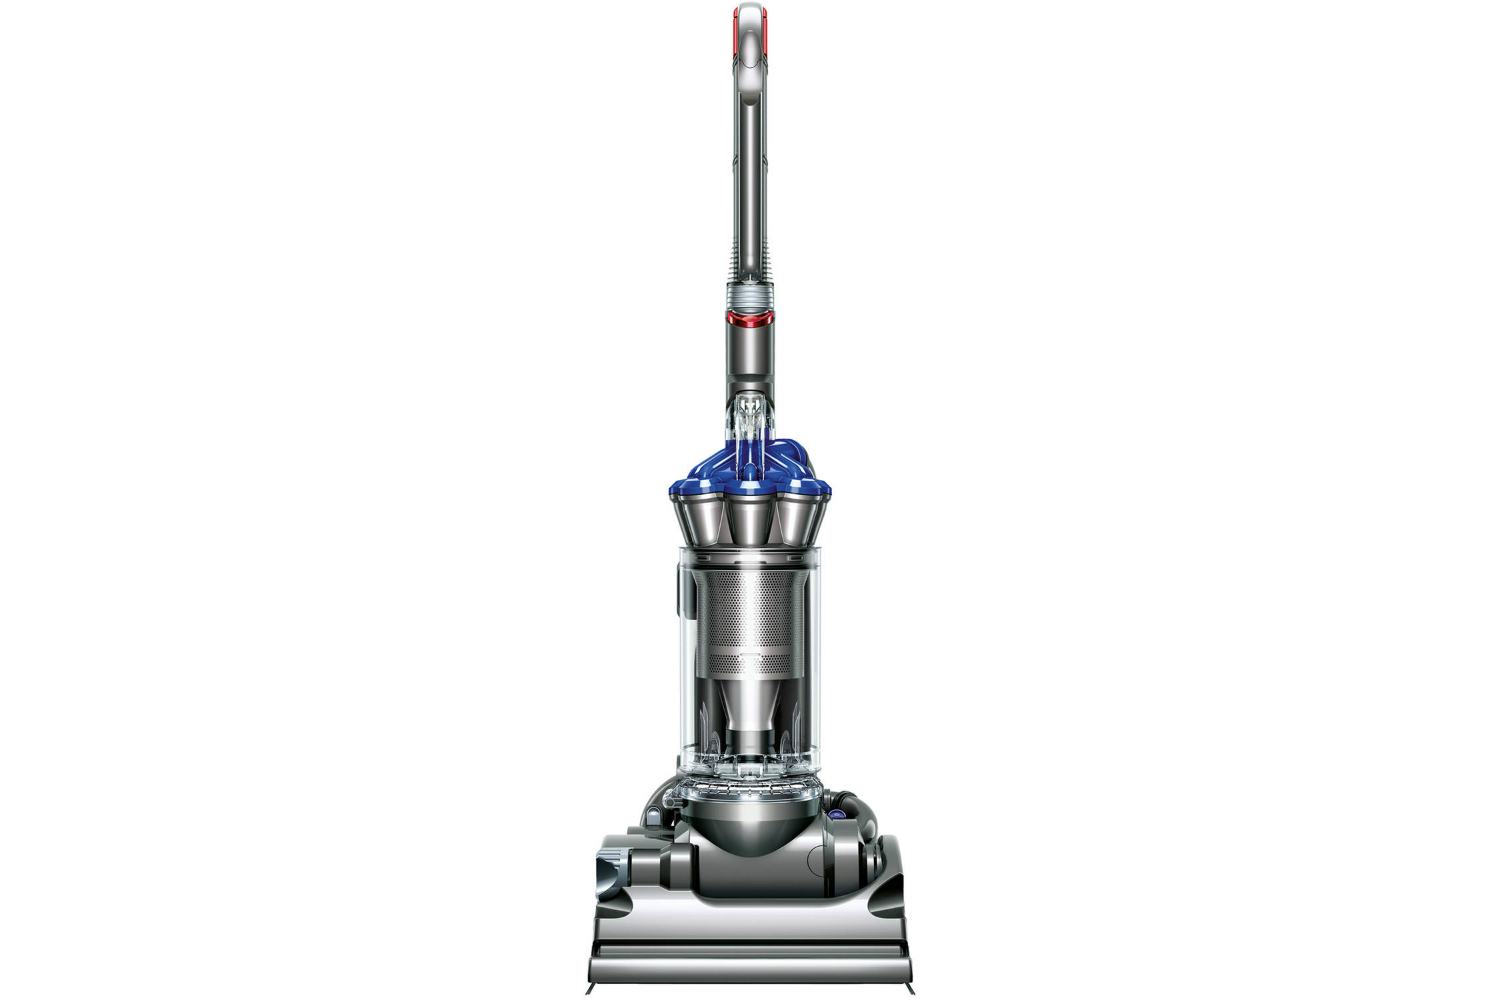 dyson and shark vacuum cleaners on sale for under 200 at walmart dc33 multifloor bagless upright 6